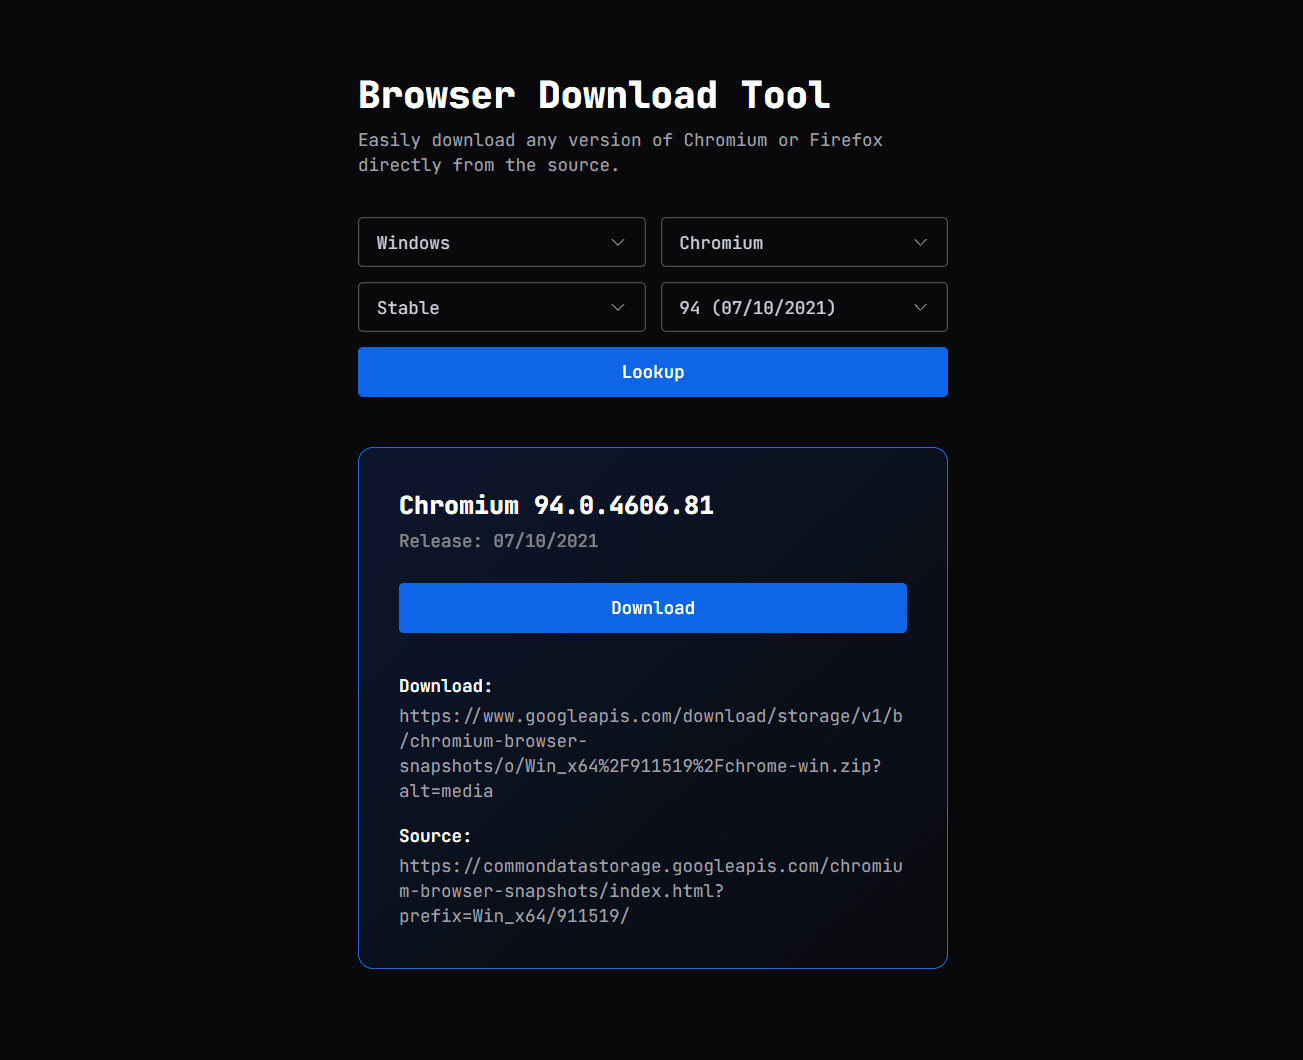 Screenshot/Mock-up of the project: Browser Download Tool